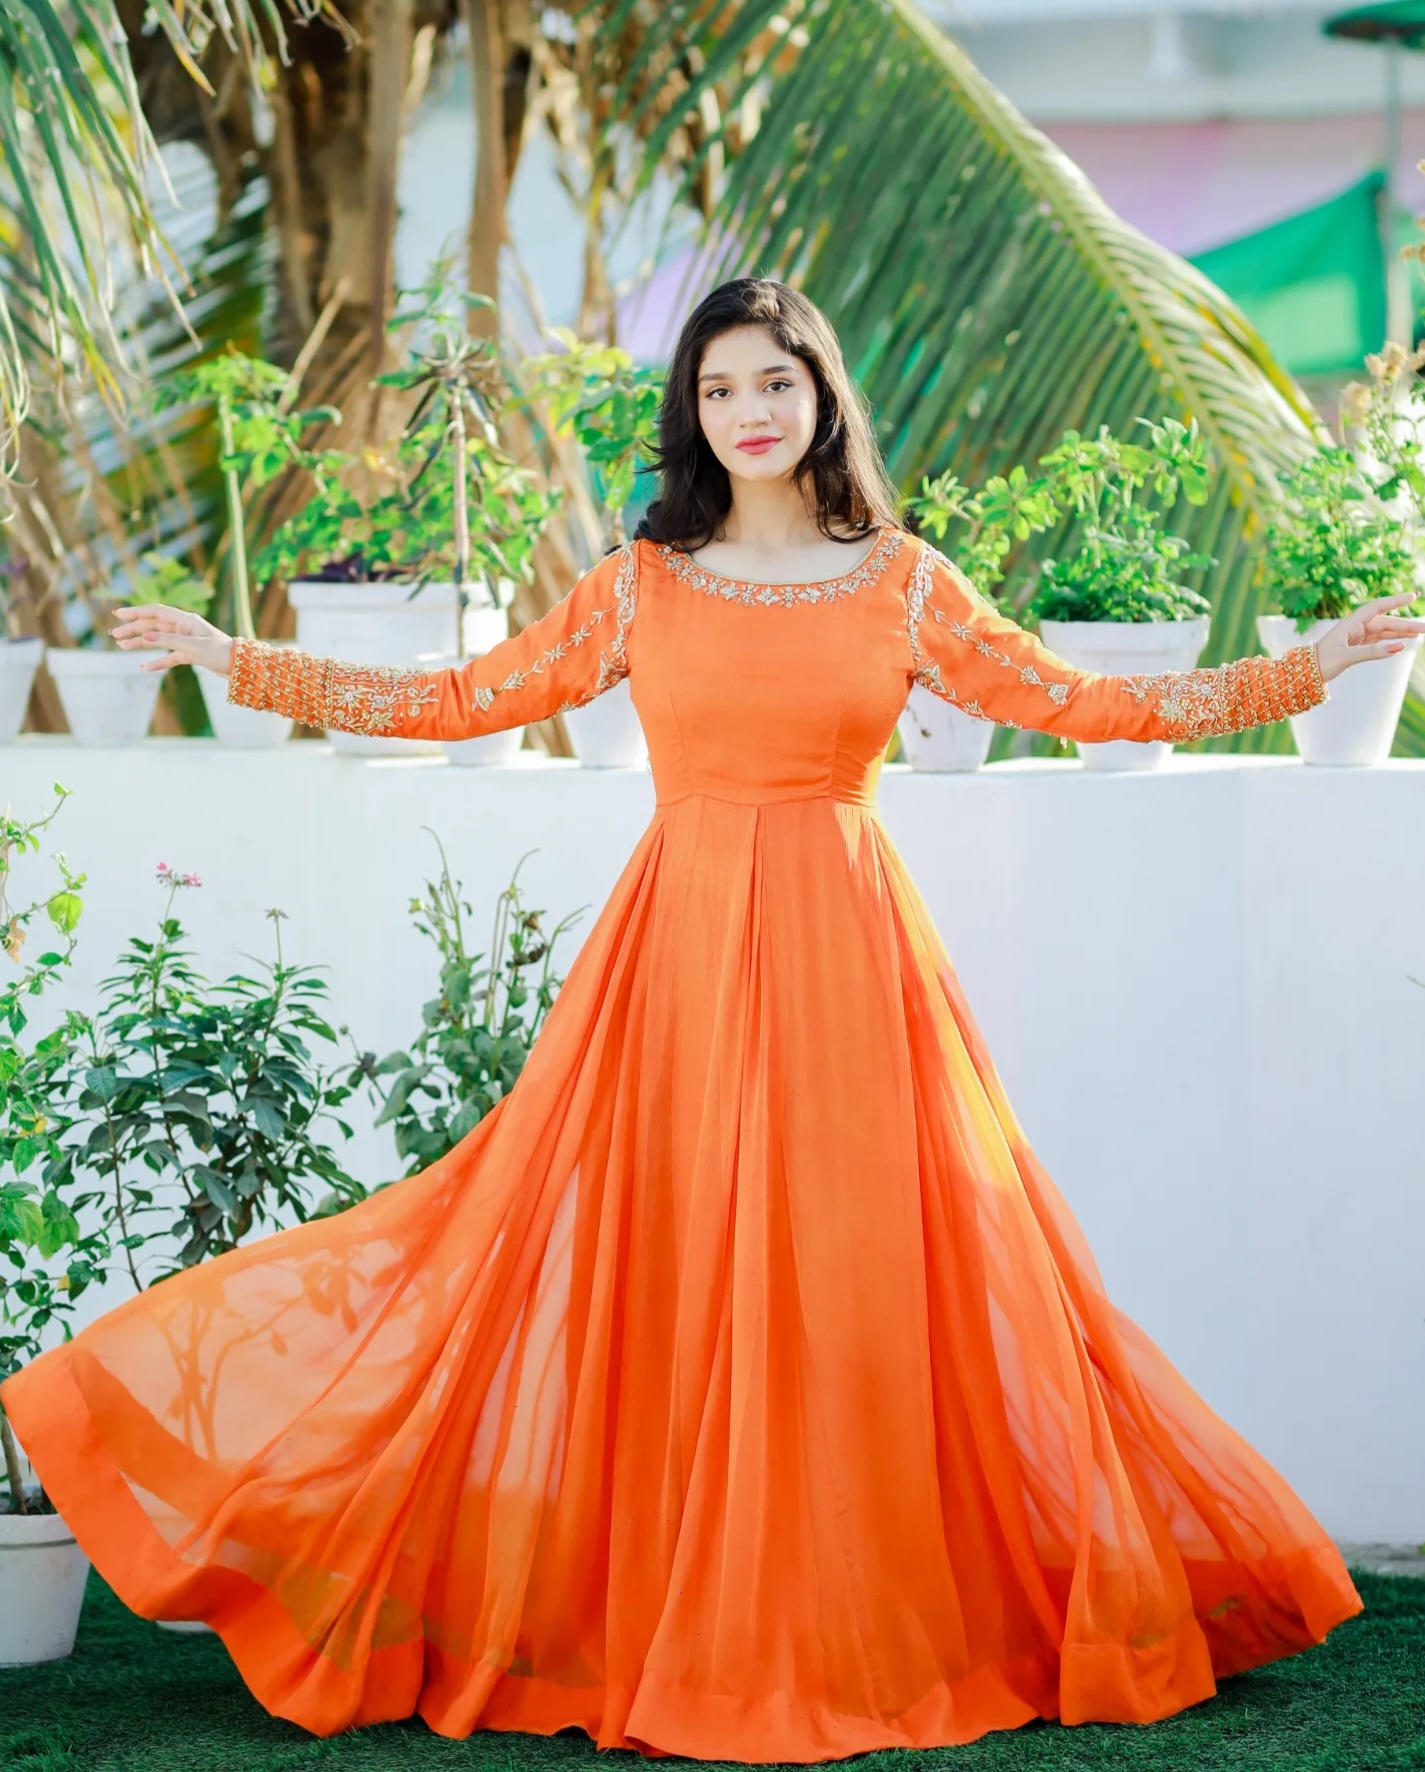 Orange Indian Gowns - Buy Indian Gown online at Clothsvilla.com